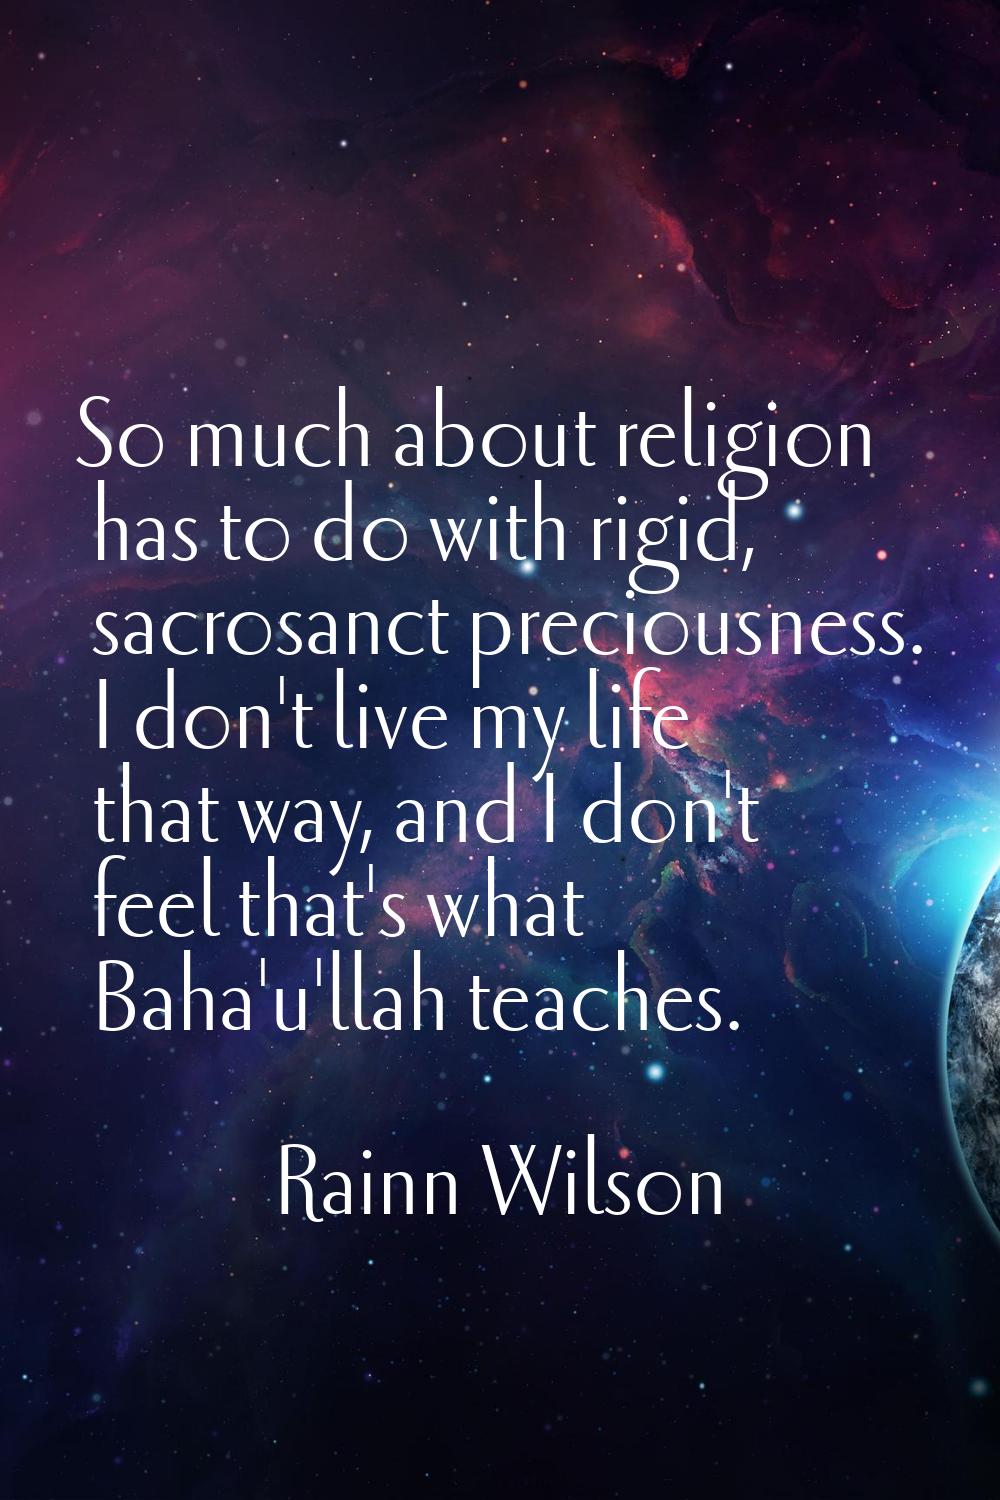 So much about religion has to do with rigid, sacrosanct preciousness. I don't live my life that way